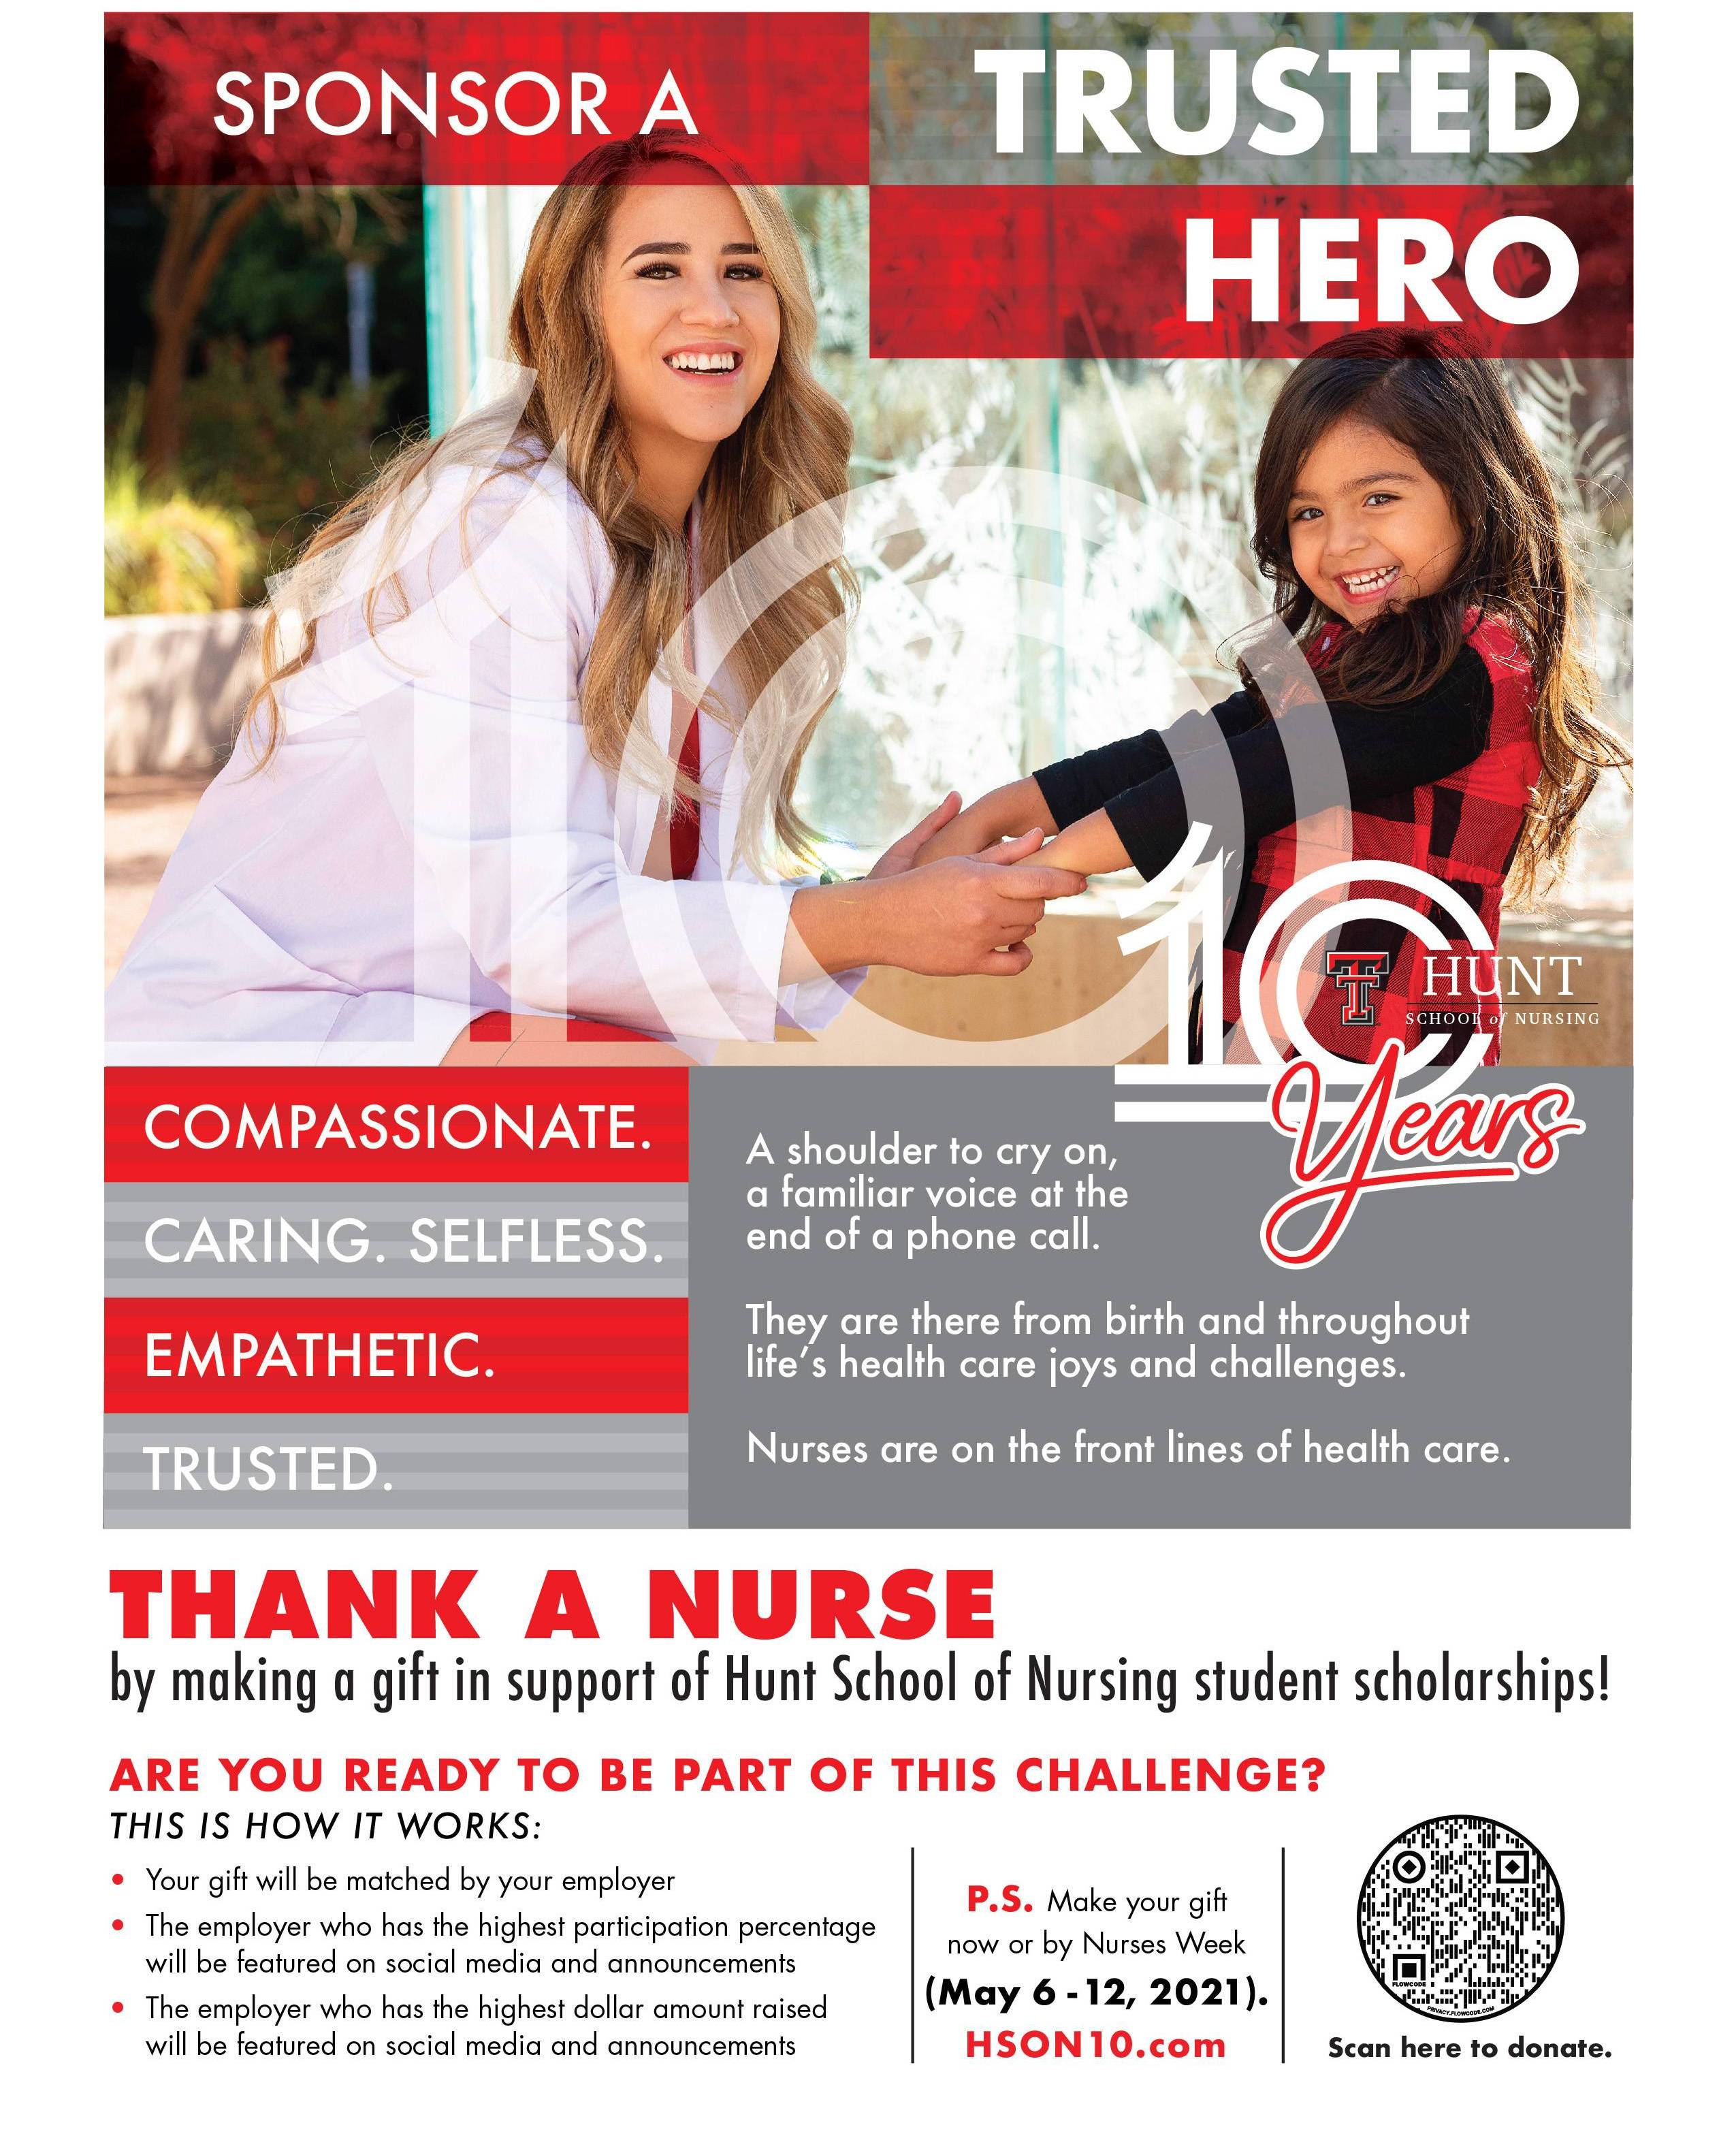 Sponsor a trusted hero. Compassionate. Caring. Selfless. Empathetic. Trusted. A shoulder to cry on, a familiar voice at the end of a phone call. They are there from birth and throughout life's health care joys adn challenges. Nurses are on the front lines of health care. Thank your favortie nurses by making a gift in their name to the Hunt School of Nursing! Are you ready to be part of this challeneg? This is how it works: Your gift will be mathced by your employer. The employer who has the highest participation percentage will be featured on social media and announcements. The employer who has the highest dollar amount raised will be featured on social media and announcements. P.S. Make your gift now or by Nurses Week (May6 - 12, 2021). HSON10.com